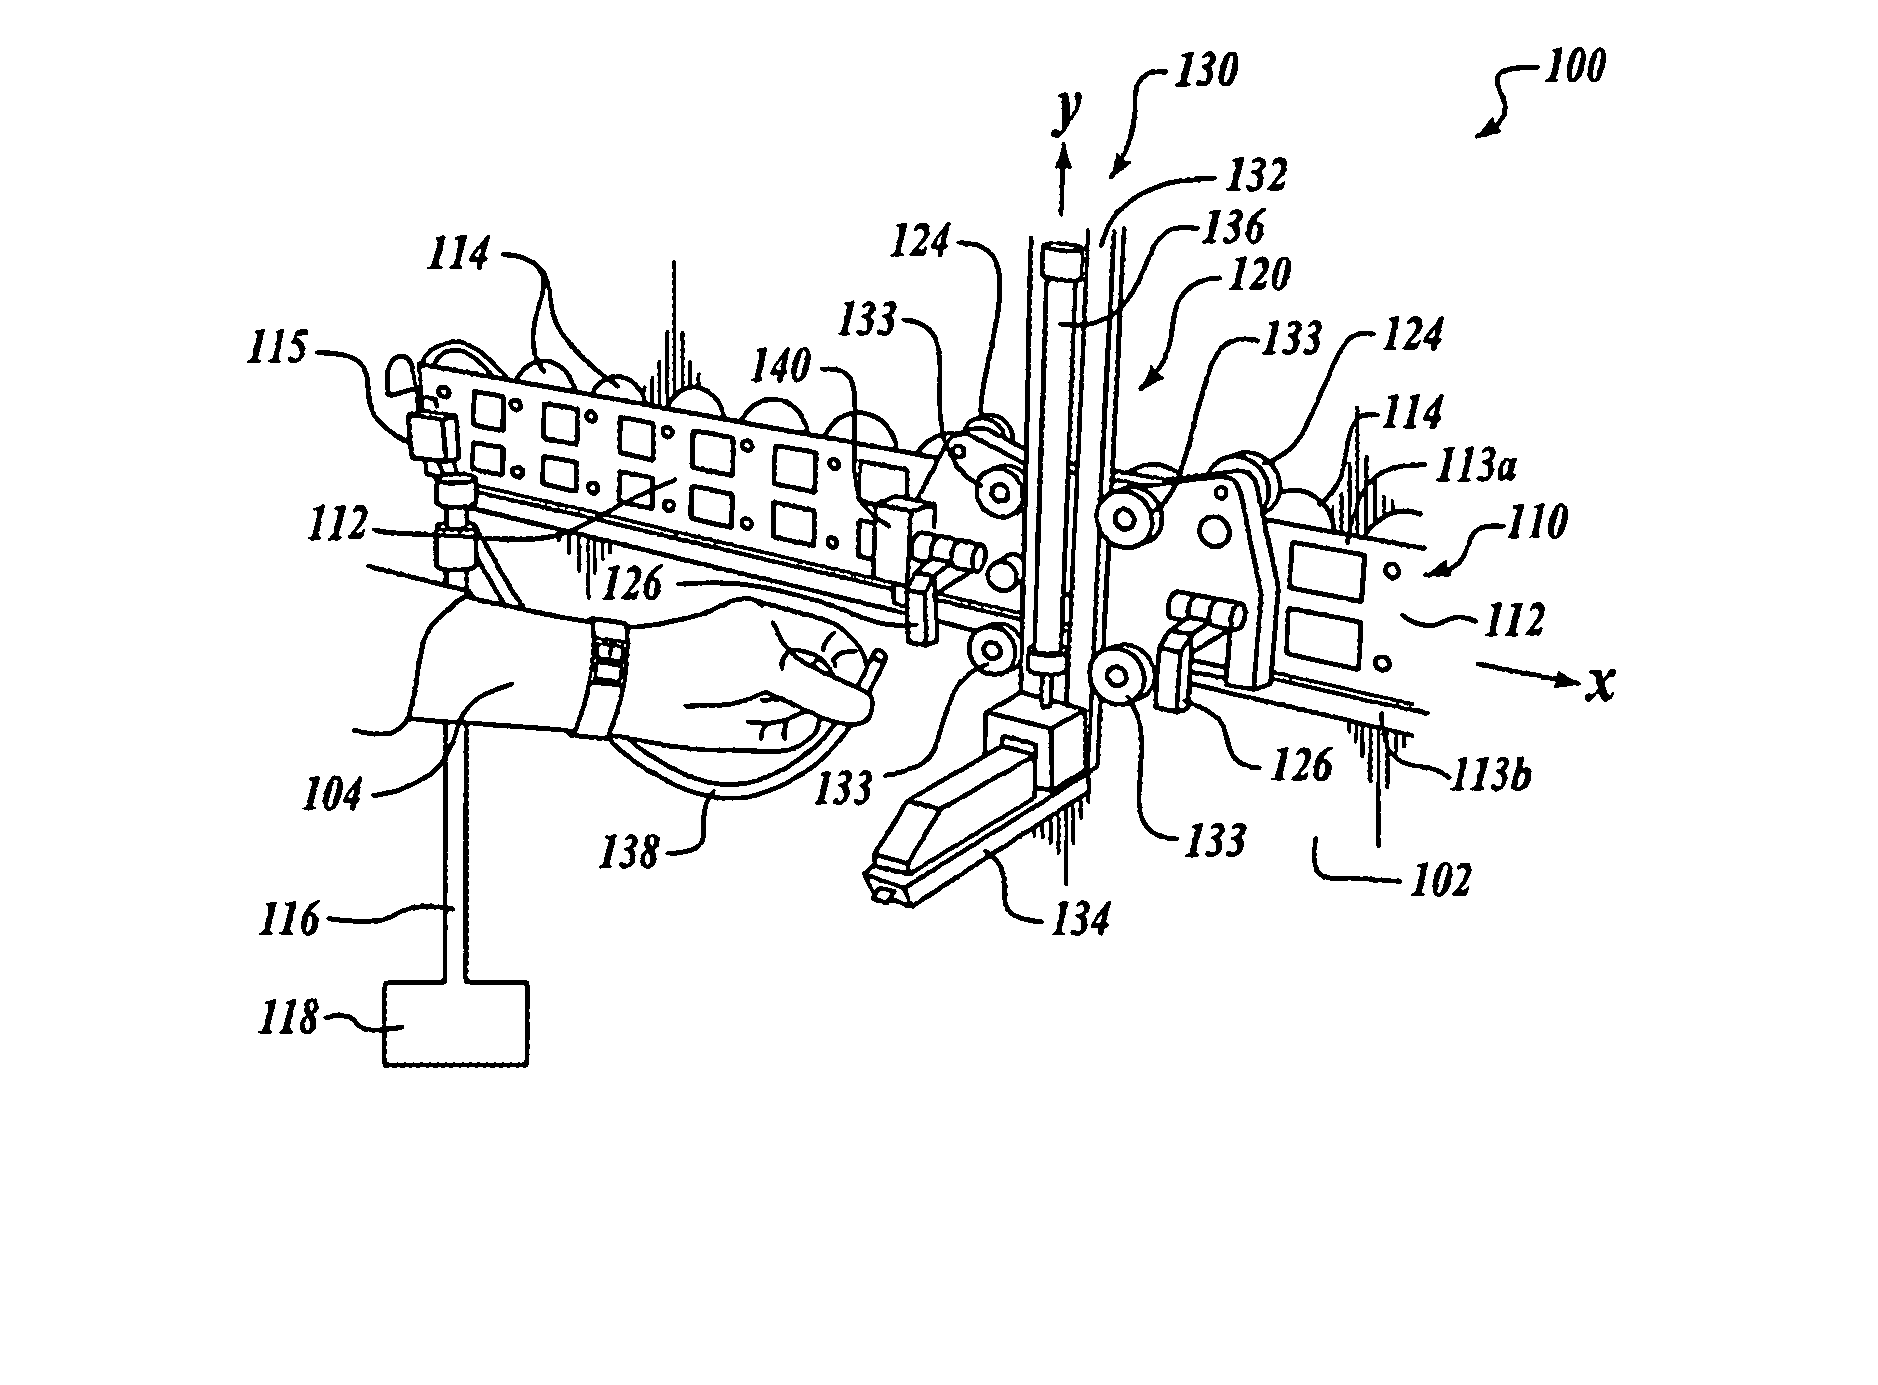 Methods and apparatus for counterbalance-assisted manufacturing operations